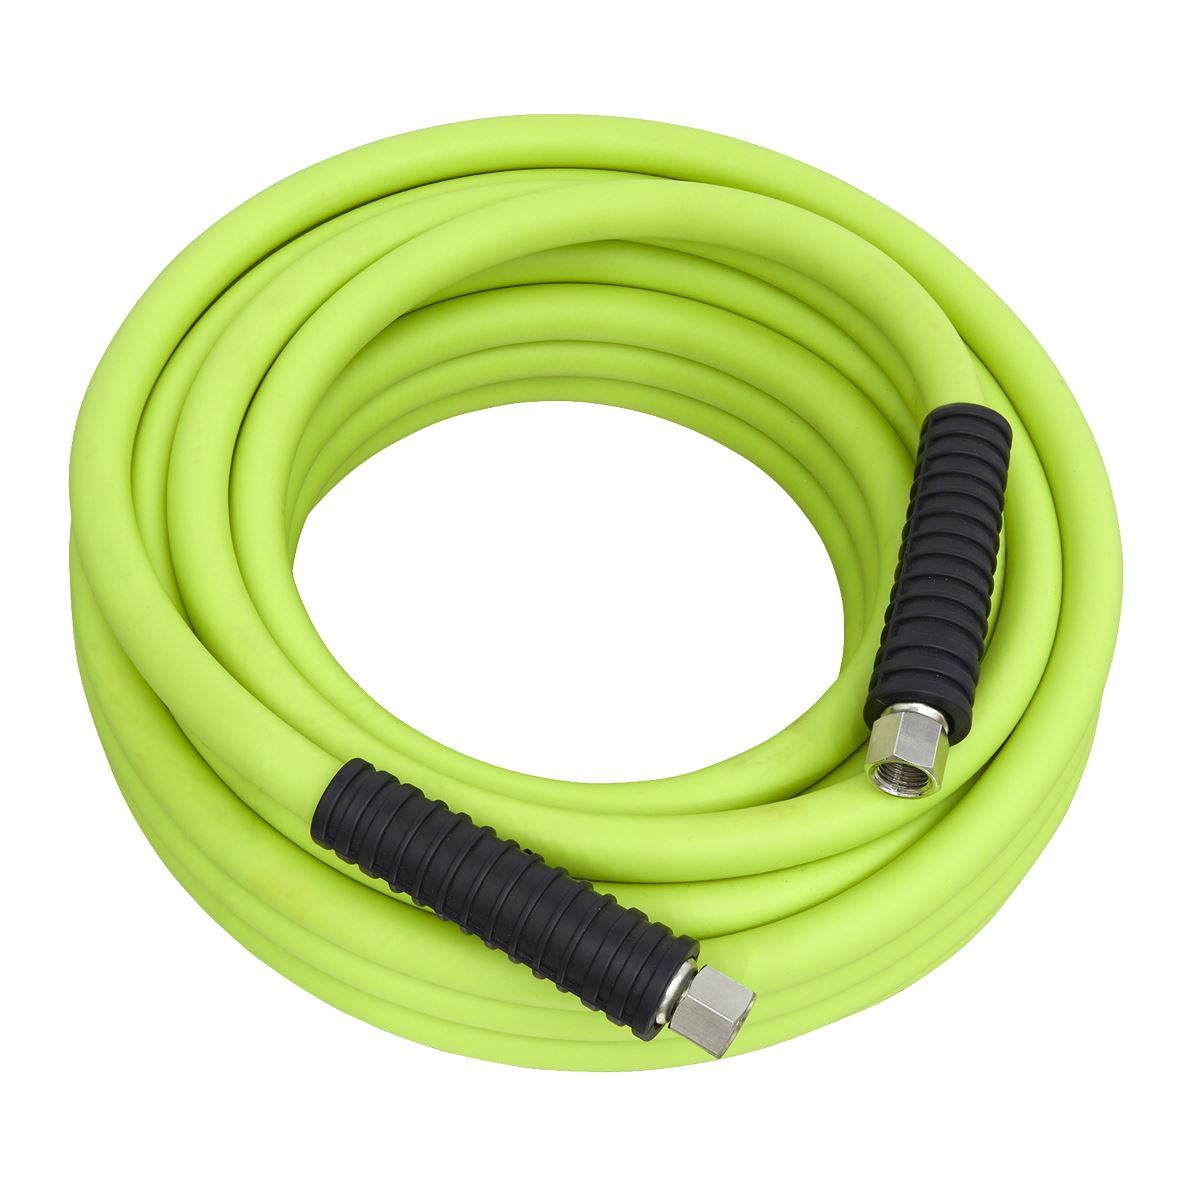 Sealey Air Hose 10m x Ø8mm Hybrid High-Visibility with 1/4"BSP Unions